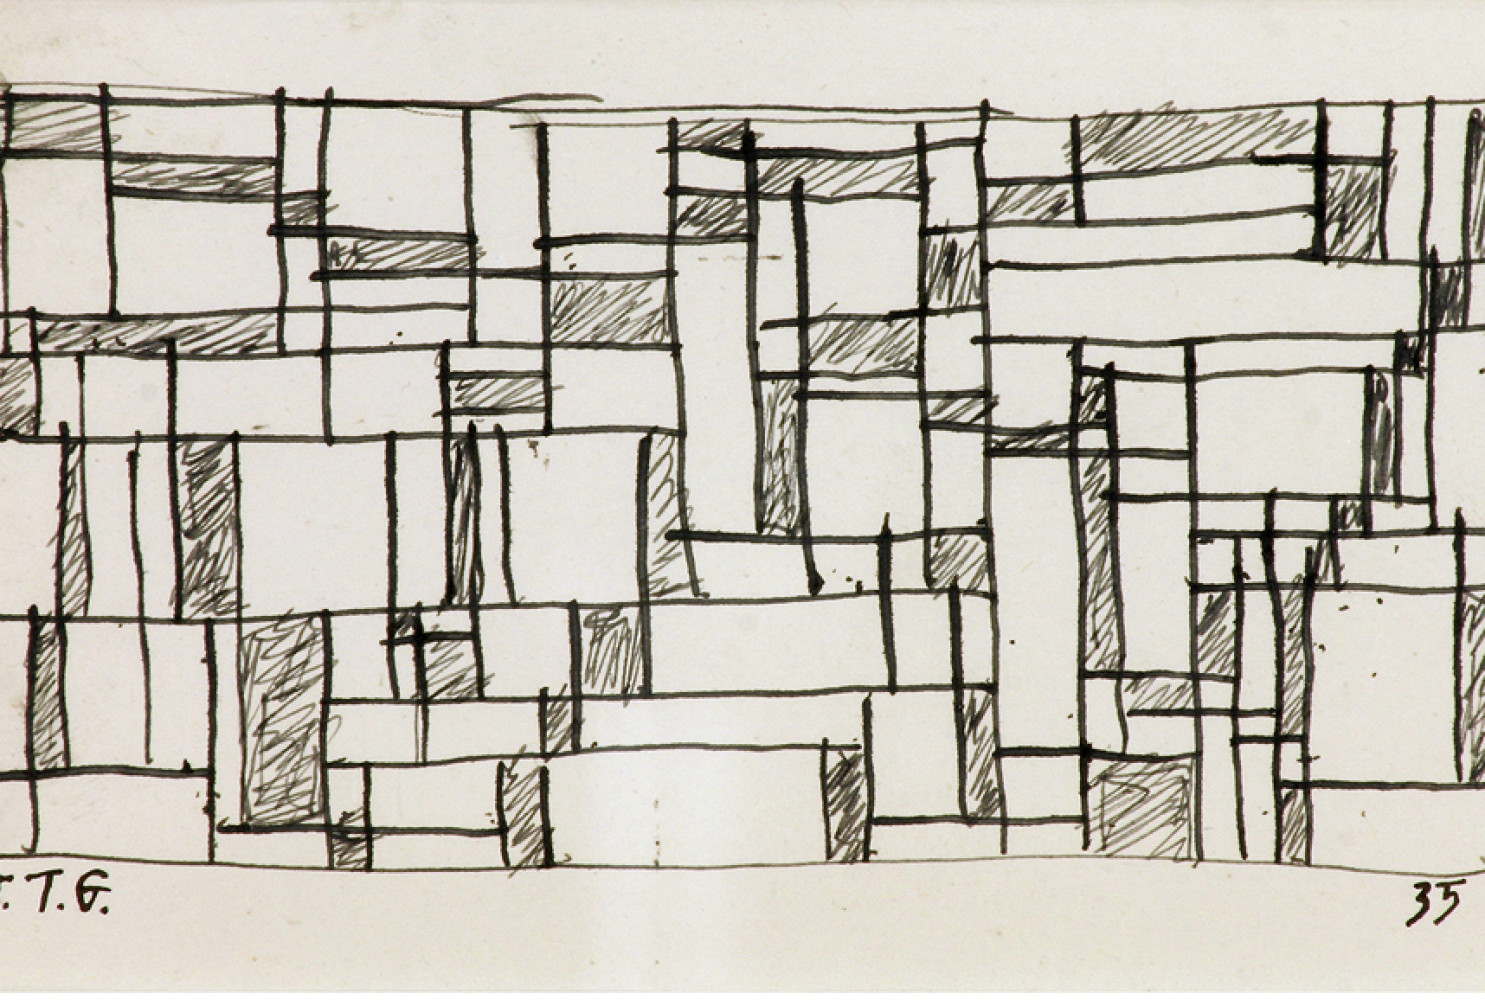 Composición (Composition), 1935, by Joaquin Torres-Garcia (Uruguayan, 1874 - 1949); Ink on paper; 20 1/8 x 16 1/8 inches. Courtesy of the Lowe Art Museum, University of Miami.